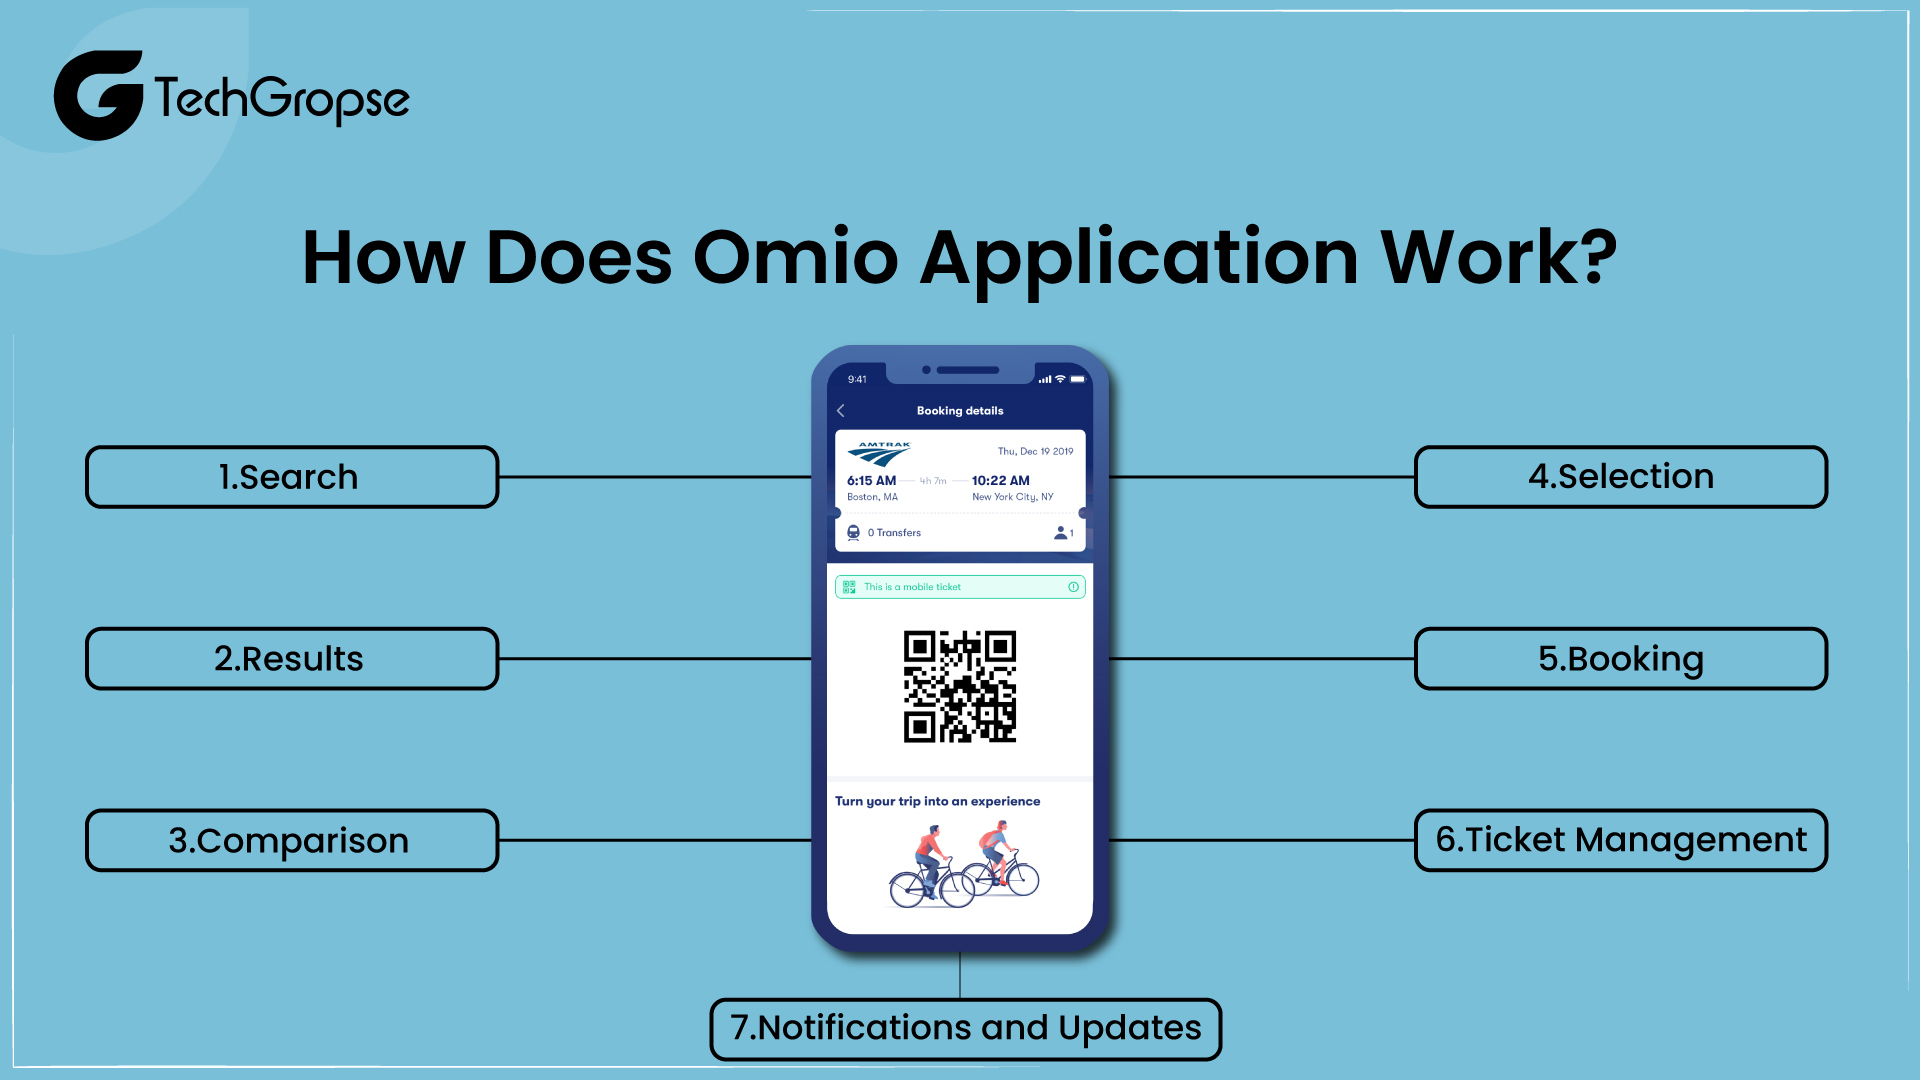 How Does Omio Application Work?